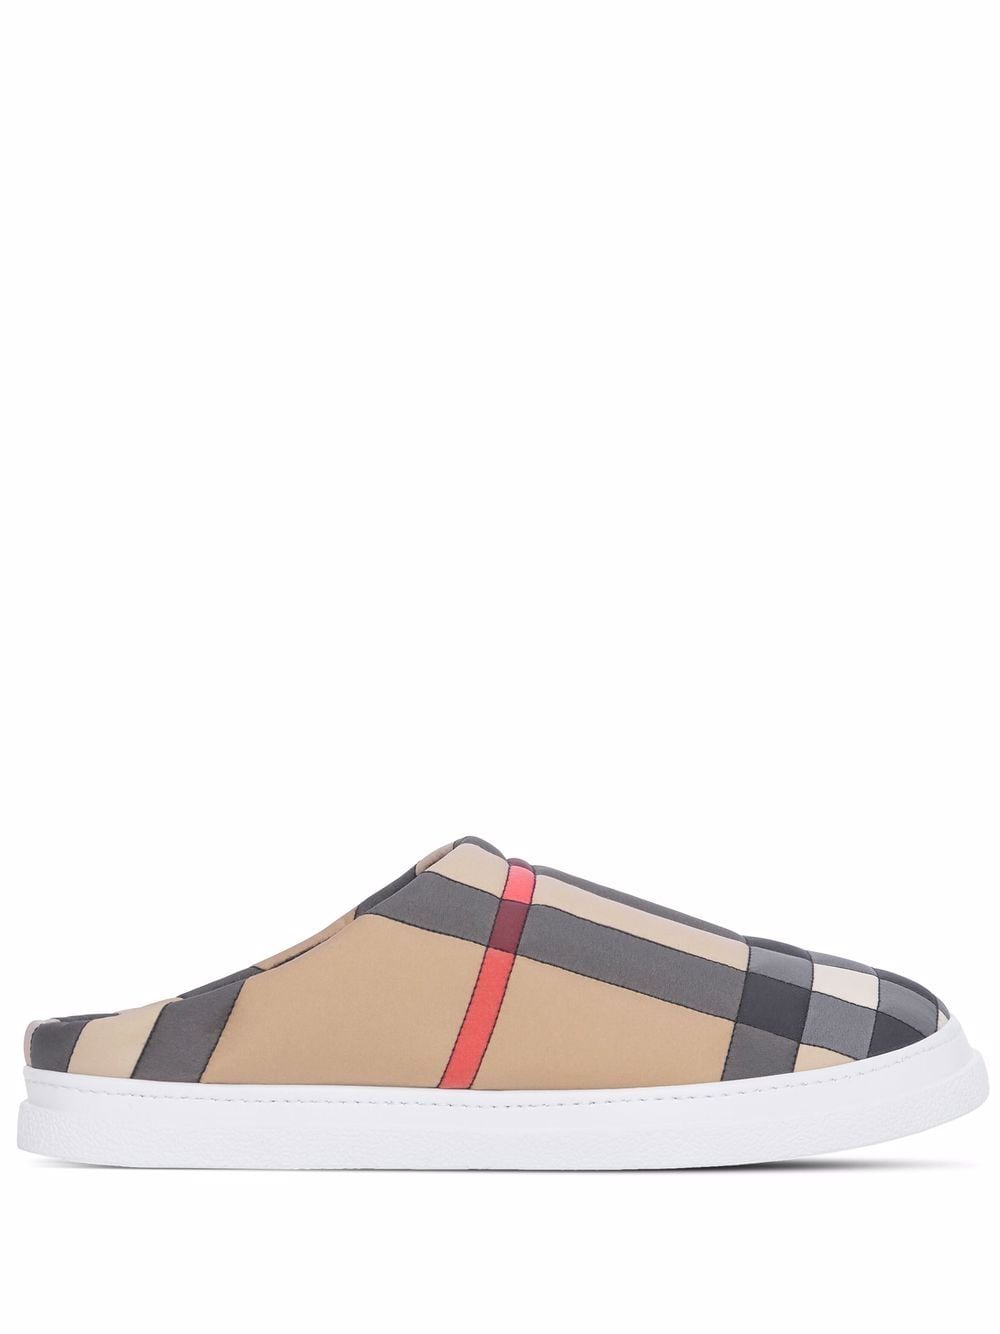 Burberry Vintage Check slippers